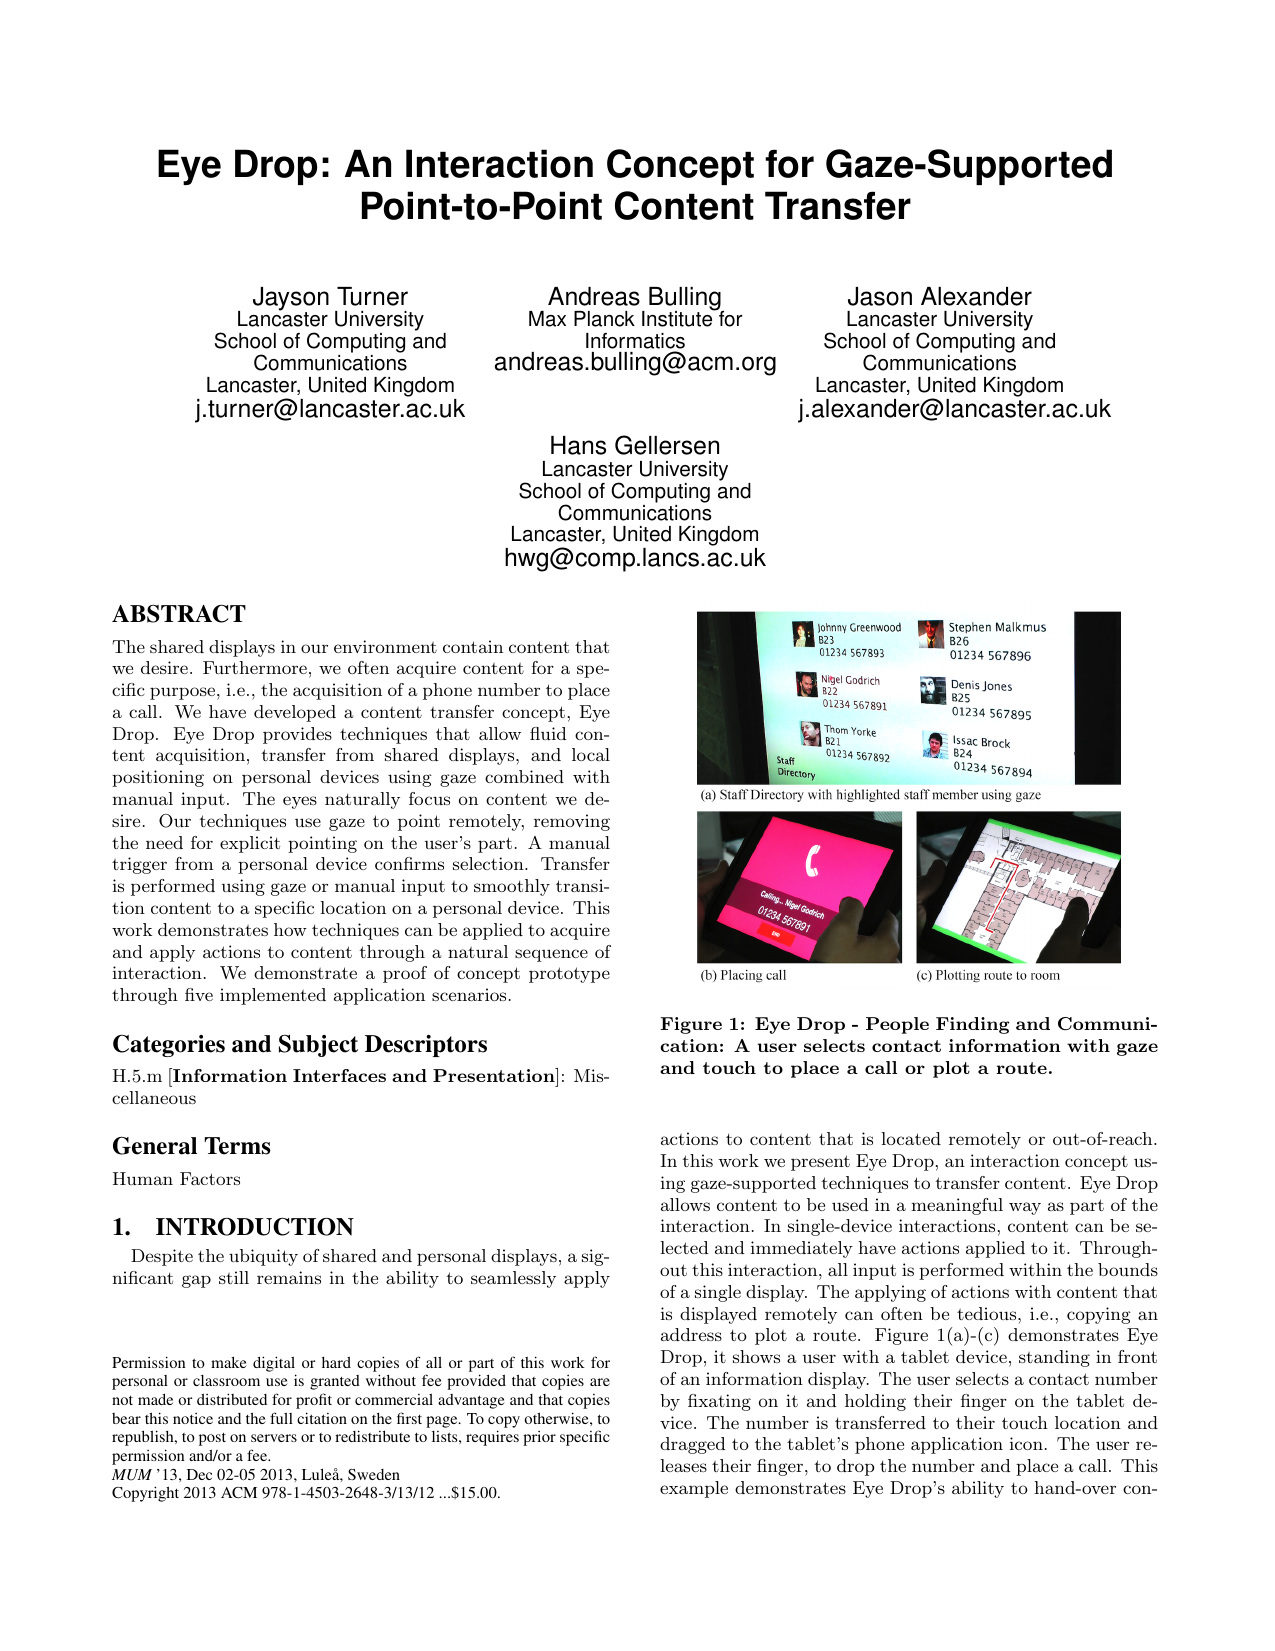 Eye Drop: An Interaction Concept for Gaze-Supported Point-to-Point Content Transfer